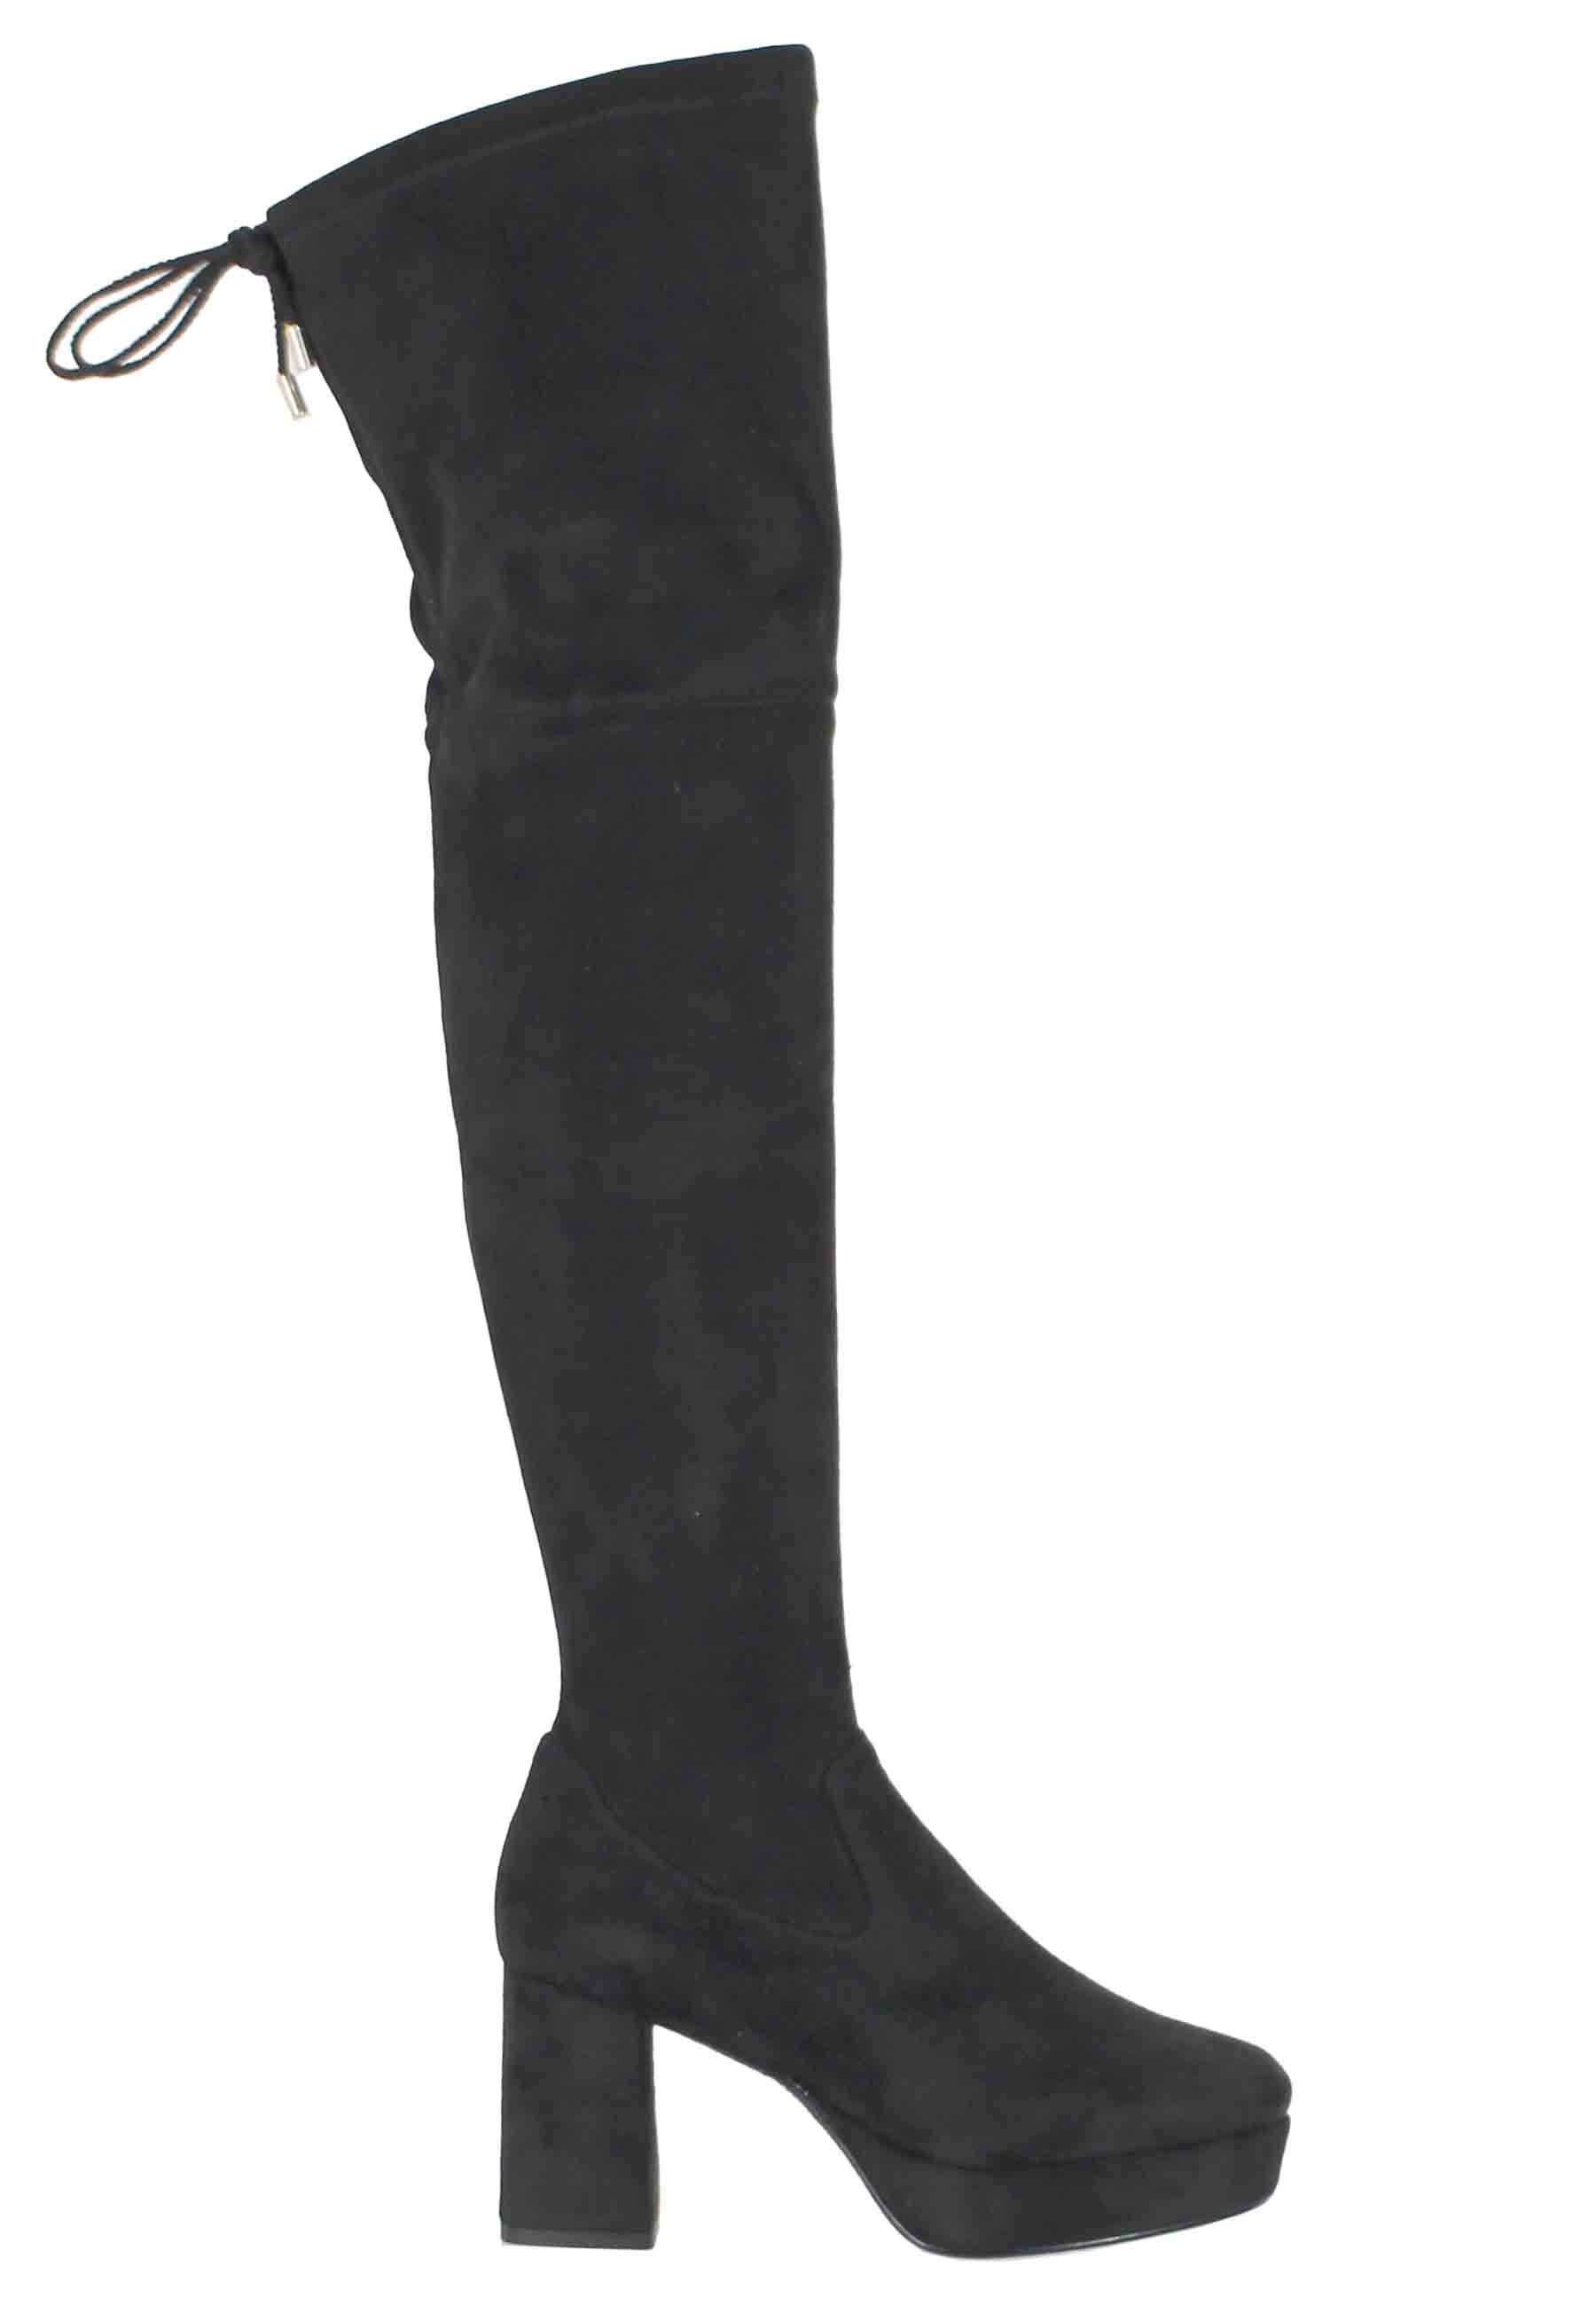 Women's boots in black suede with high shaft